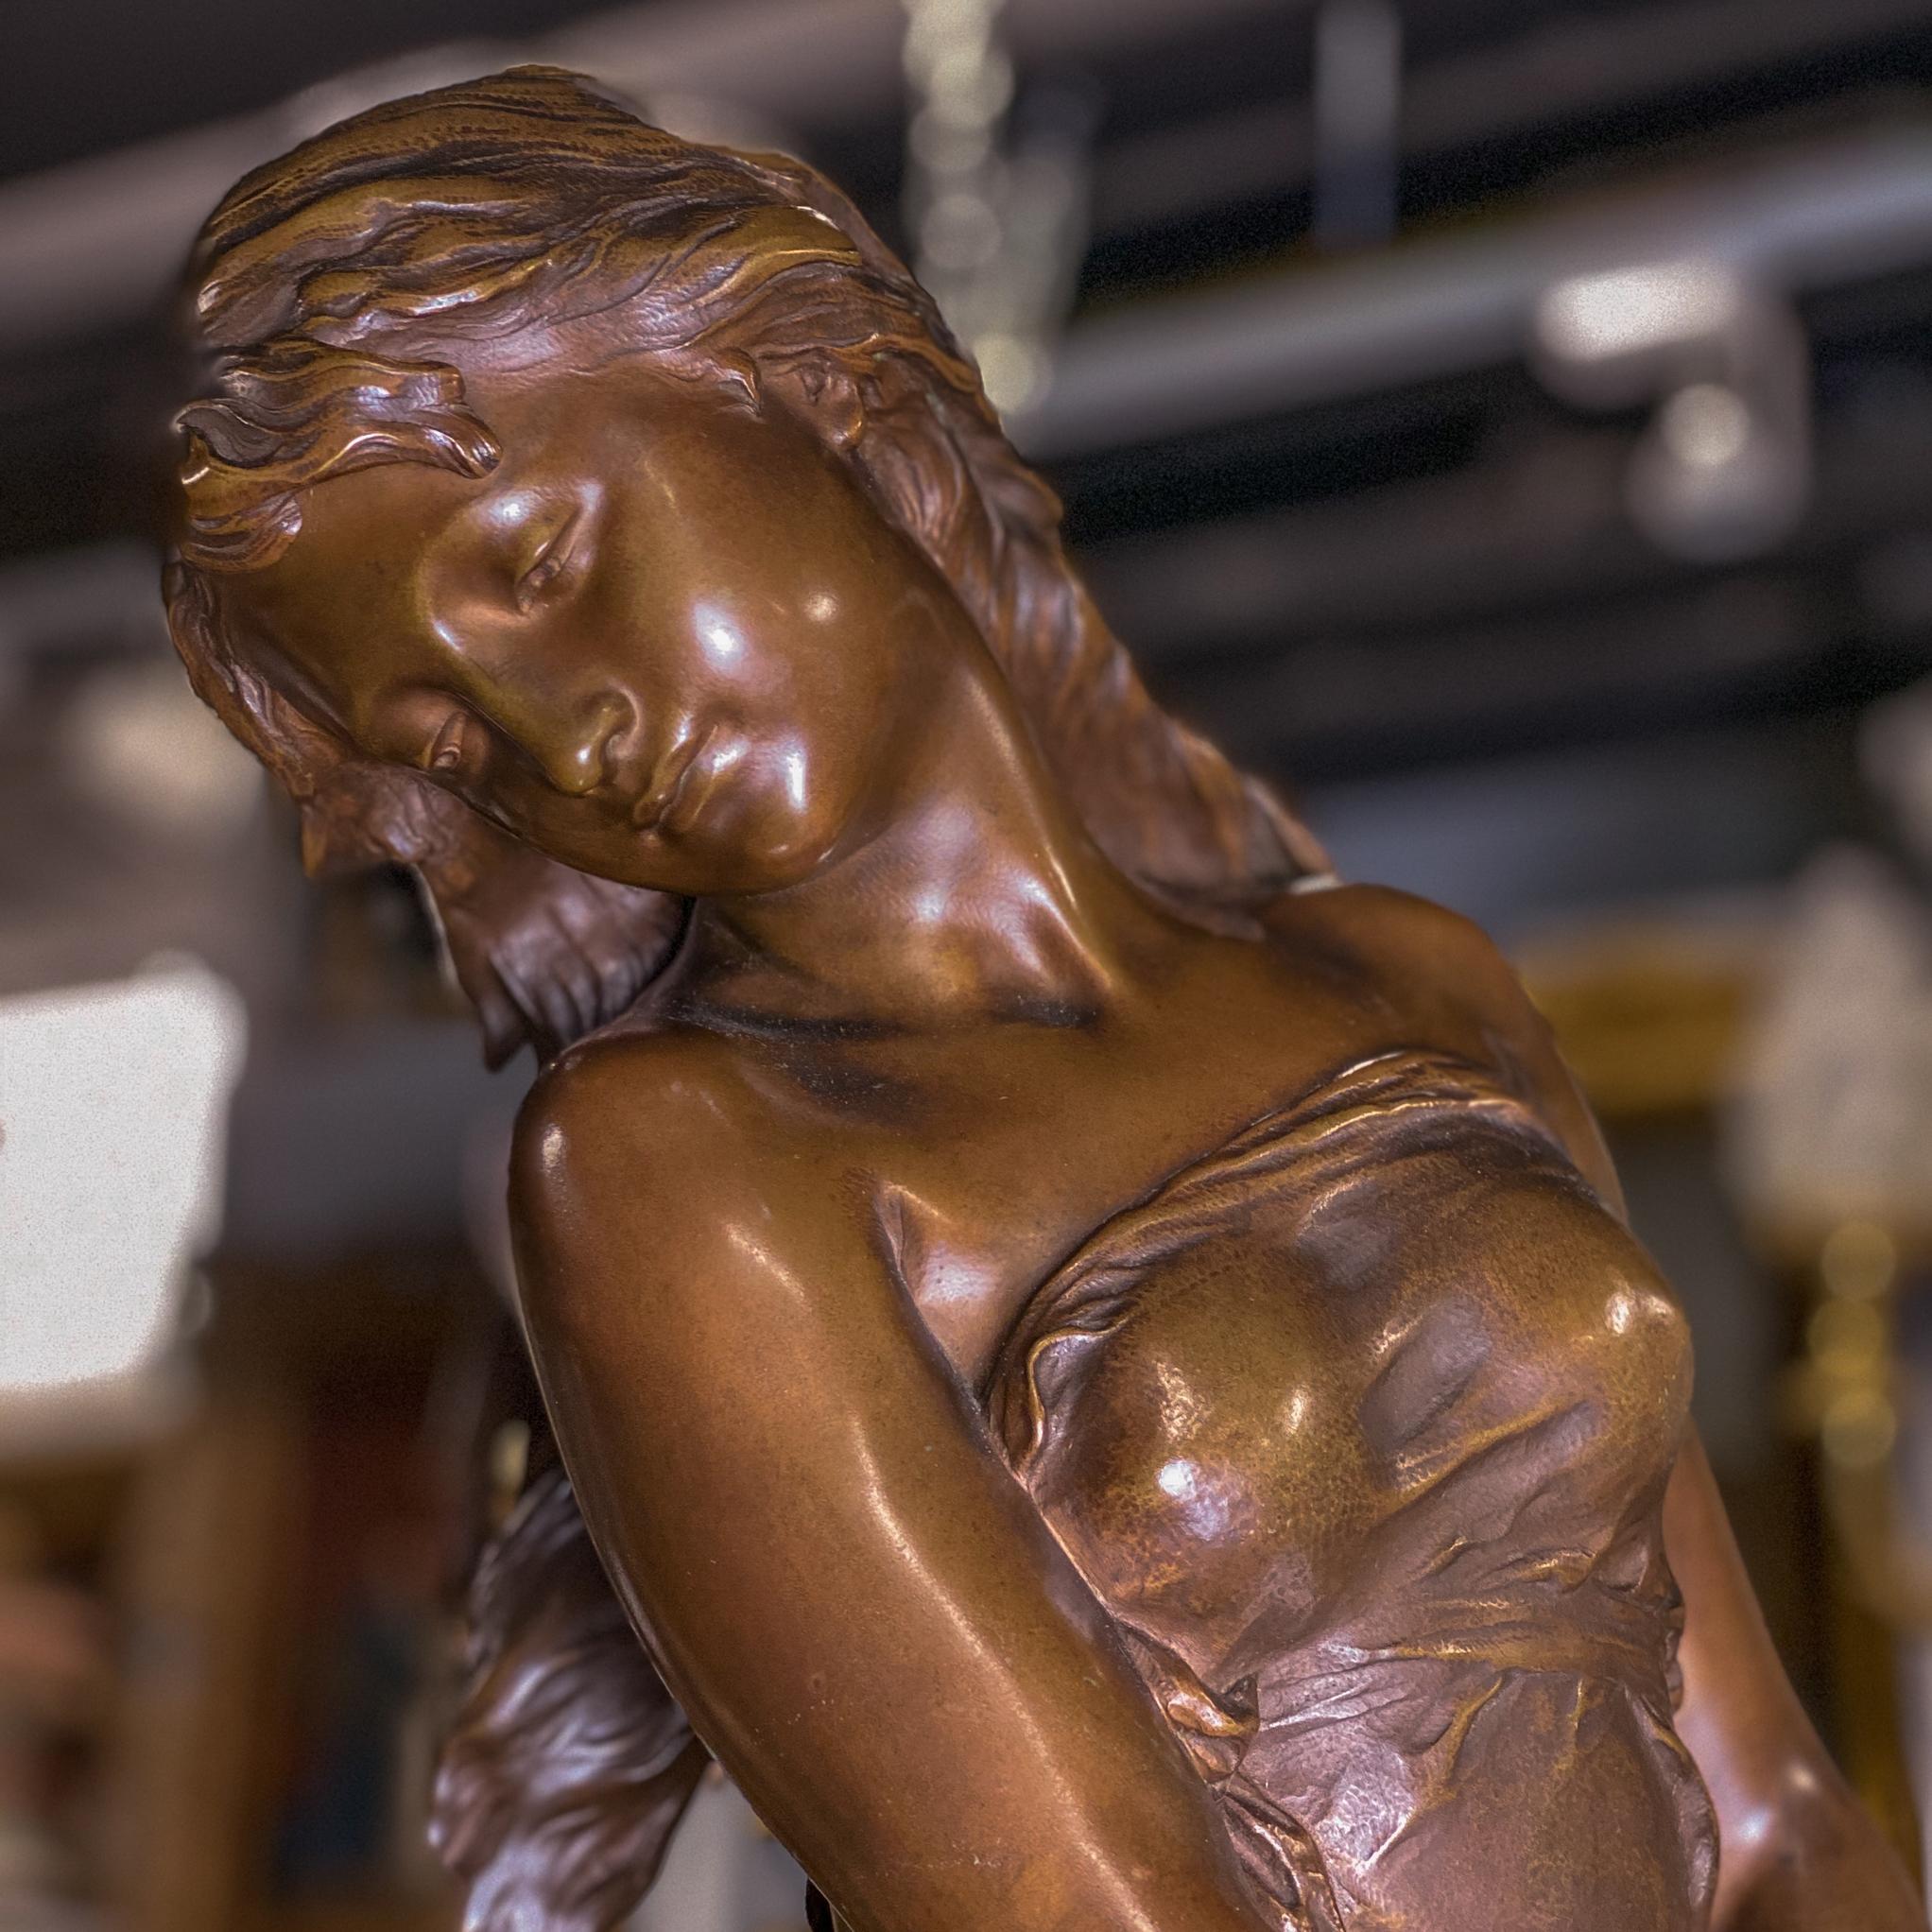 A fine quality patinated bronze sculpture entitled of ‘L’Été,’ depicting summer. Signed on base ‘Math. Moreau,’ with foundry mark ‘Susse Freres Edi. Paris.’

Artist: Mathurin Moreau (1822-1912) 
Origin: French
Dimension: 32 1/2 in. x 17 in.
  